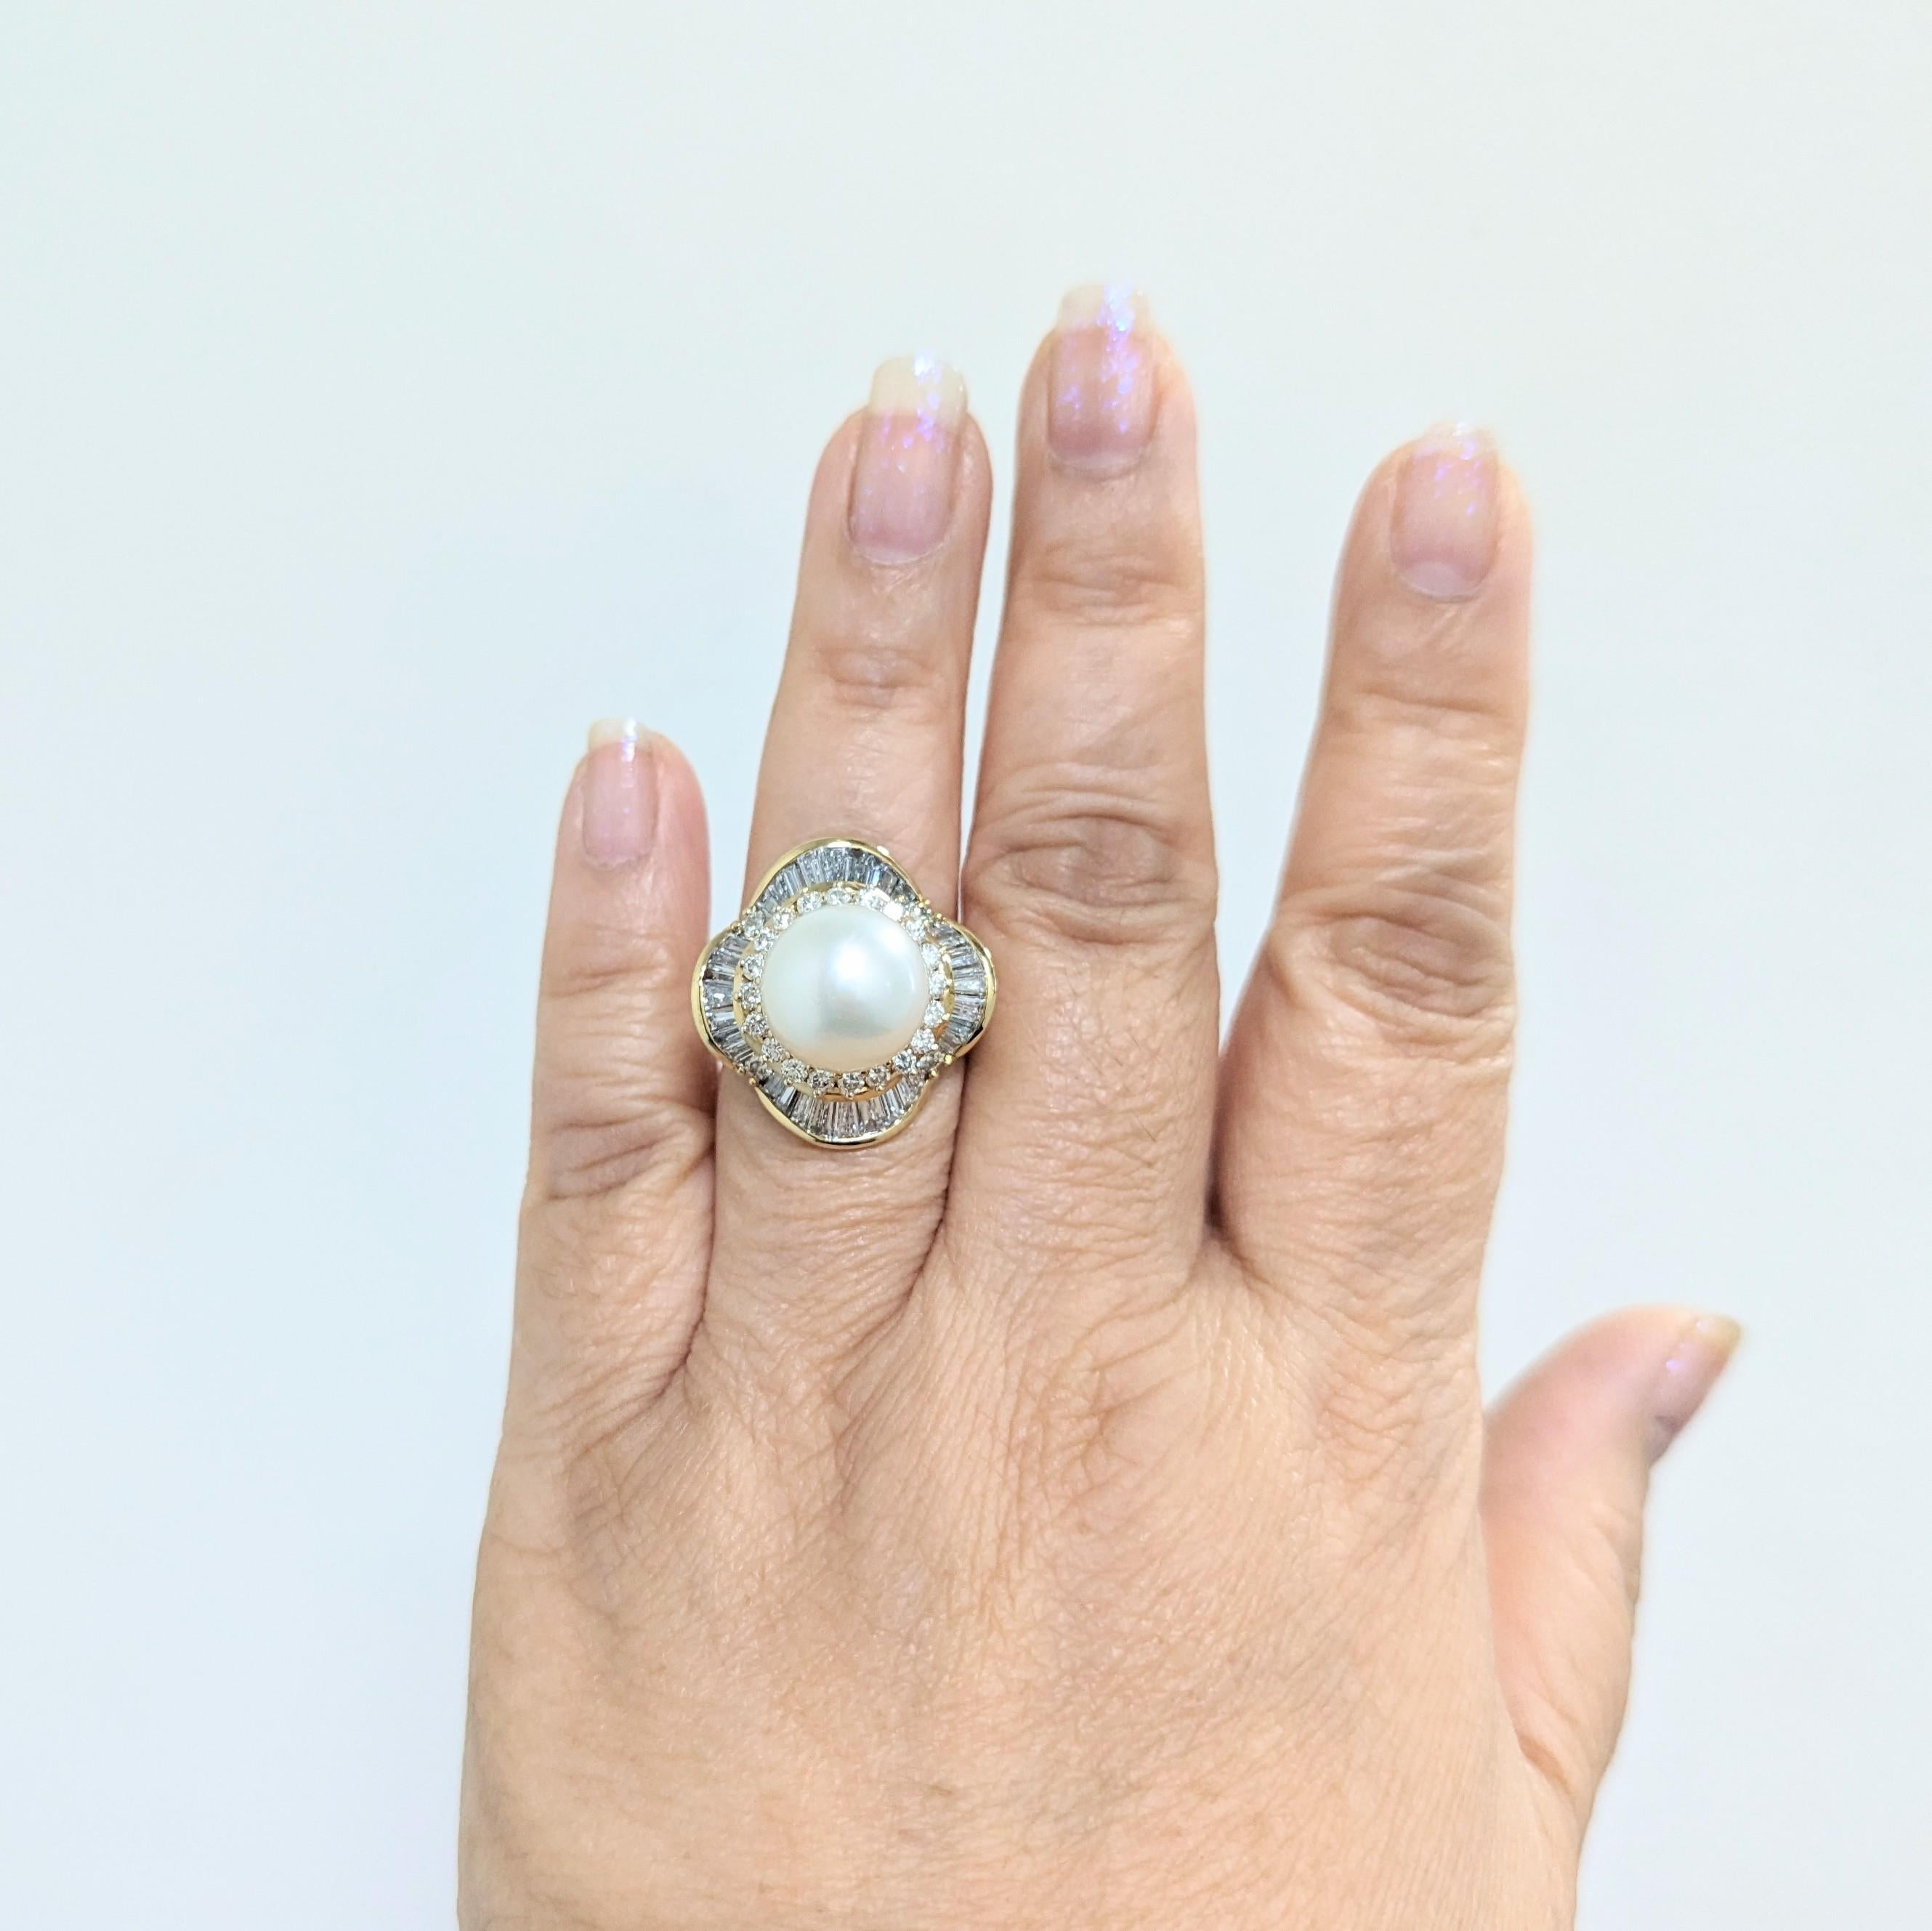 Beautiful large white pearl round with 2.70 ct. good quality white diamond rounds and baguettes.  Handmade in 18k yellow gold.  Ring size 9.25.